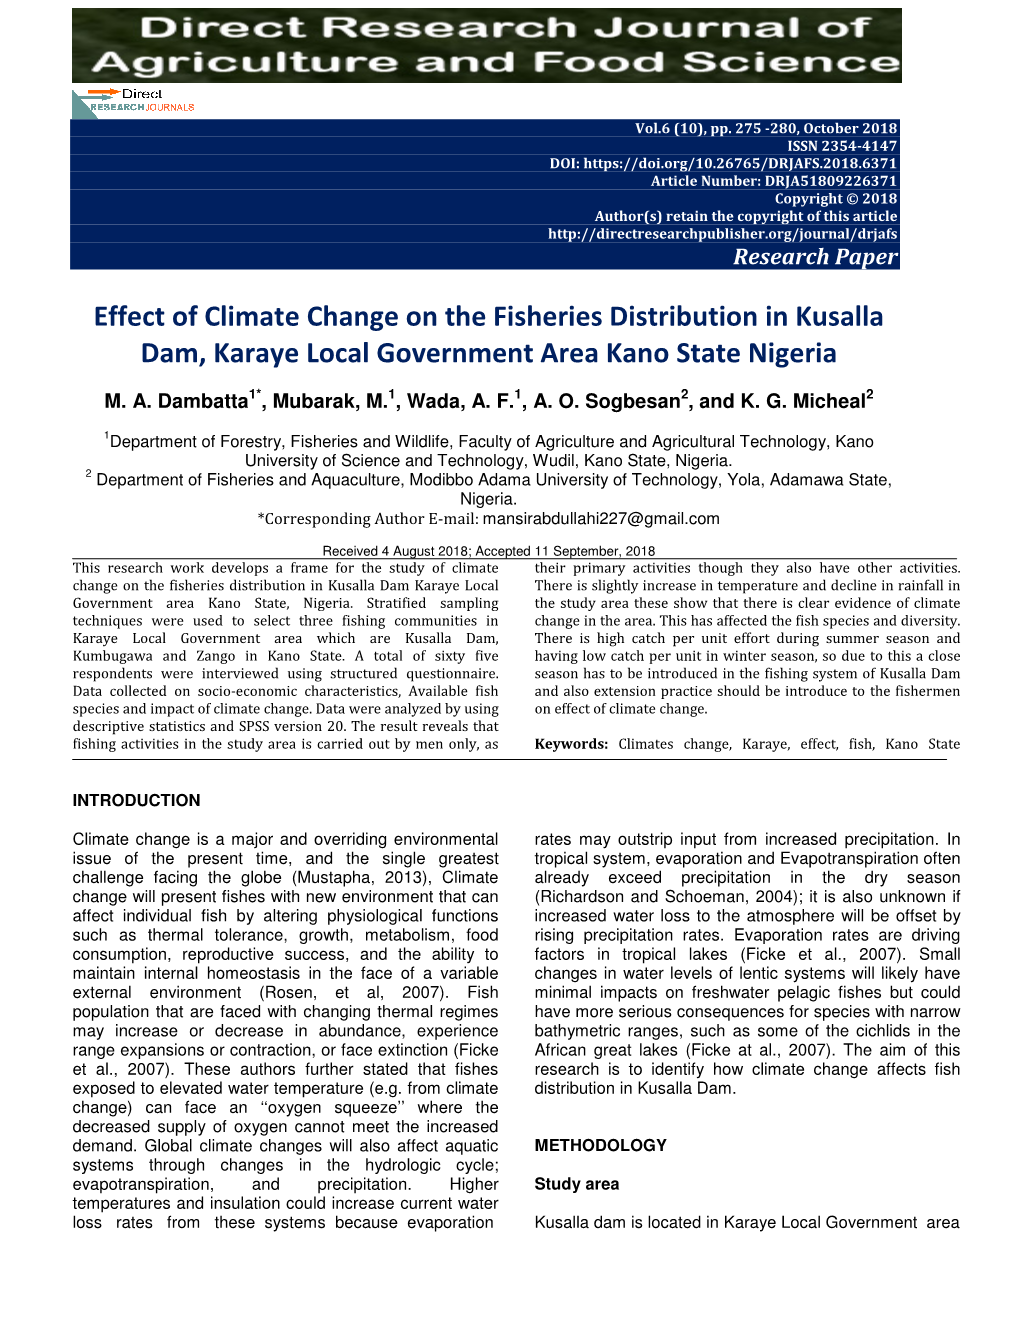 Effect of Climate Change on the Fisheries Distribution in Kusalla Dam, Karaye Local Government Area Kano State Nigeria